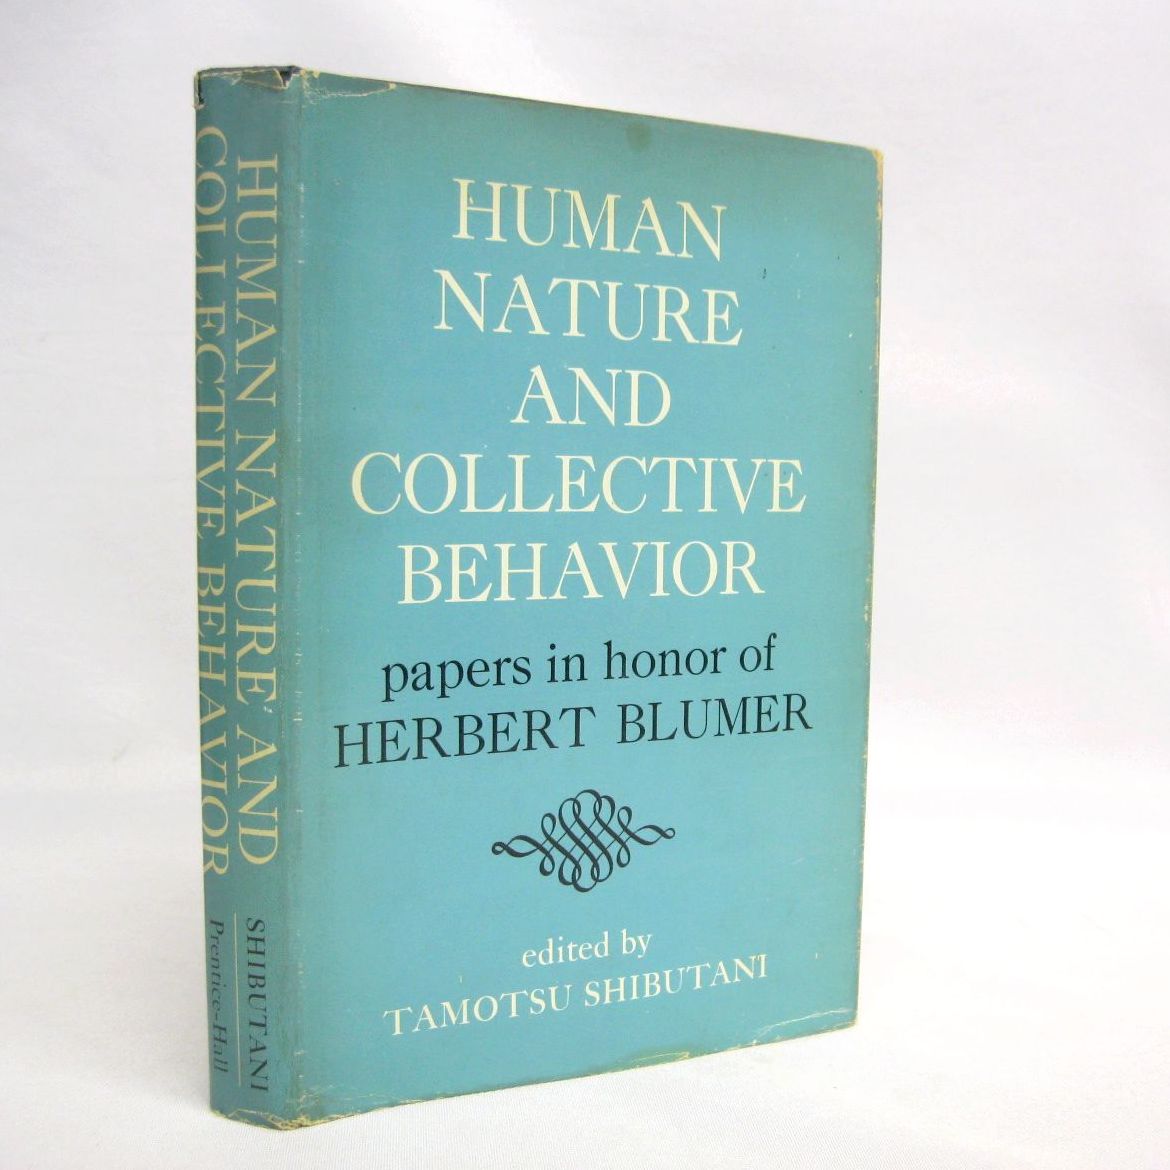 Human Nature and Collective Behavior: Papers in Honor of Herbert Blumer edited by Tamotsu Shibutani